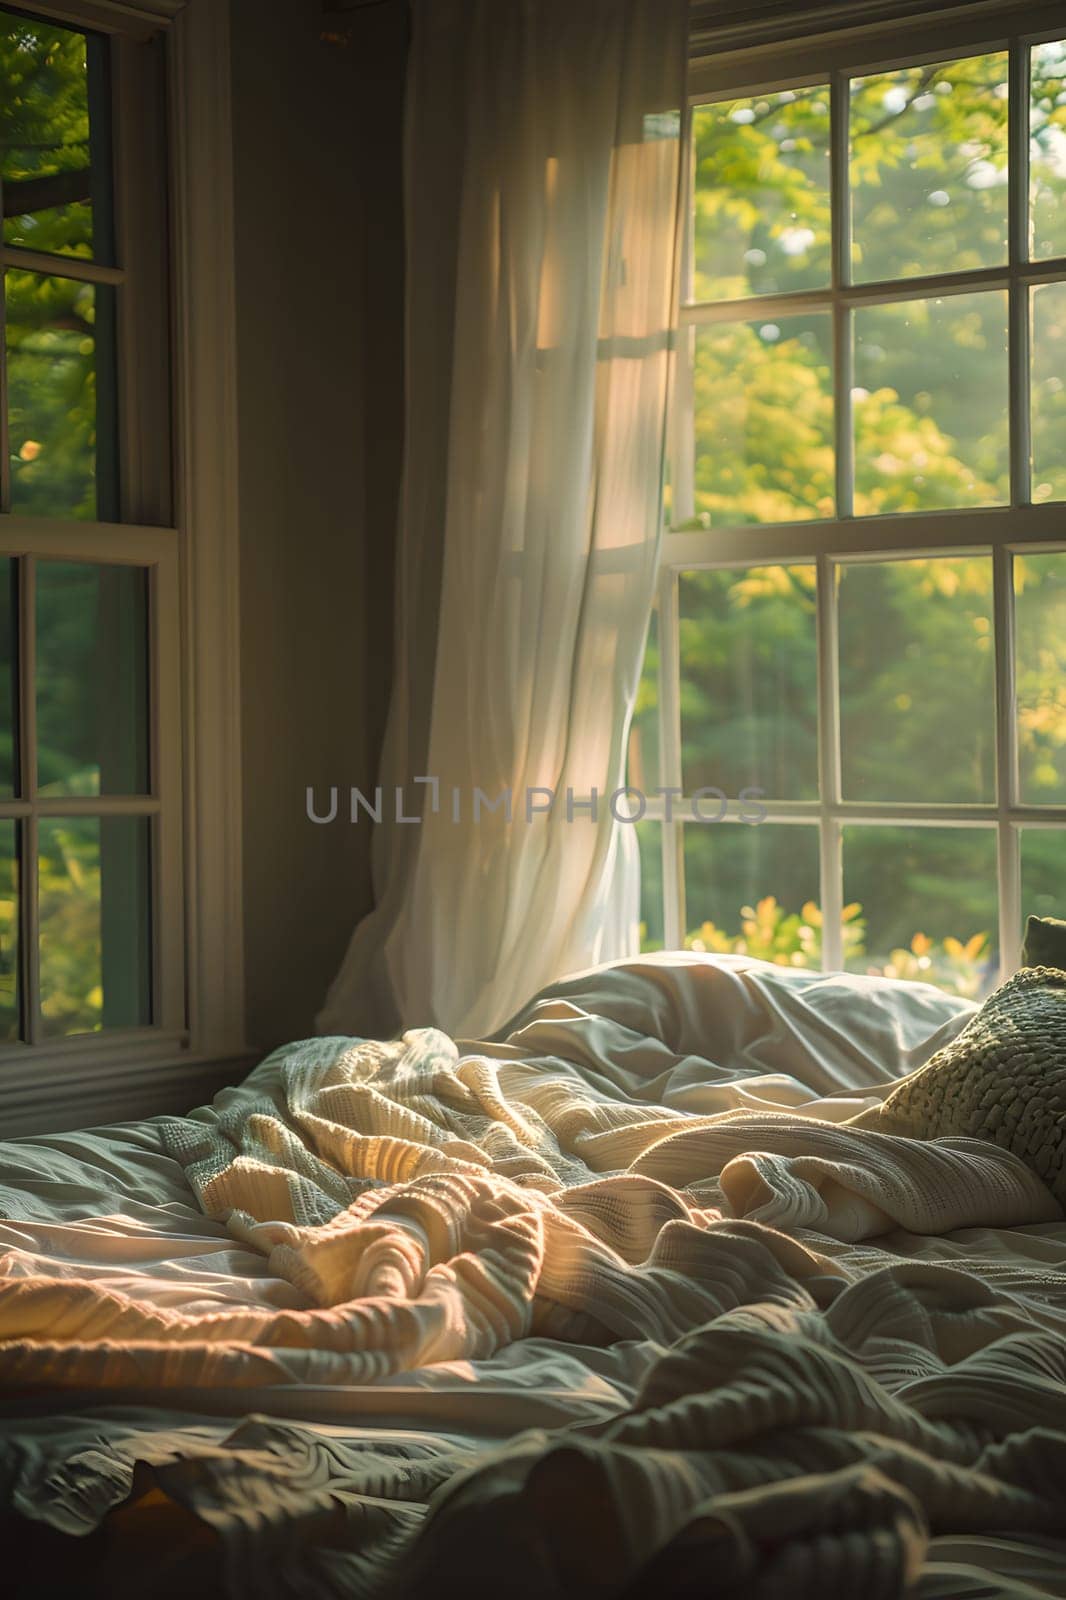 A hardwood bed frame sits in front of a rectangular window, with sunlight filtering through the tints and shades. A plant decorates the room, complementing the soft linens on the bed